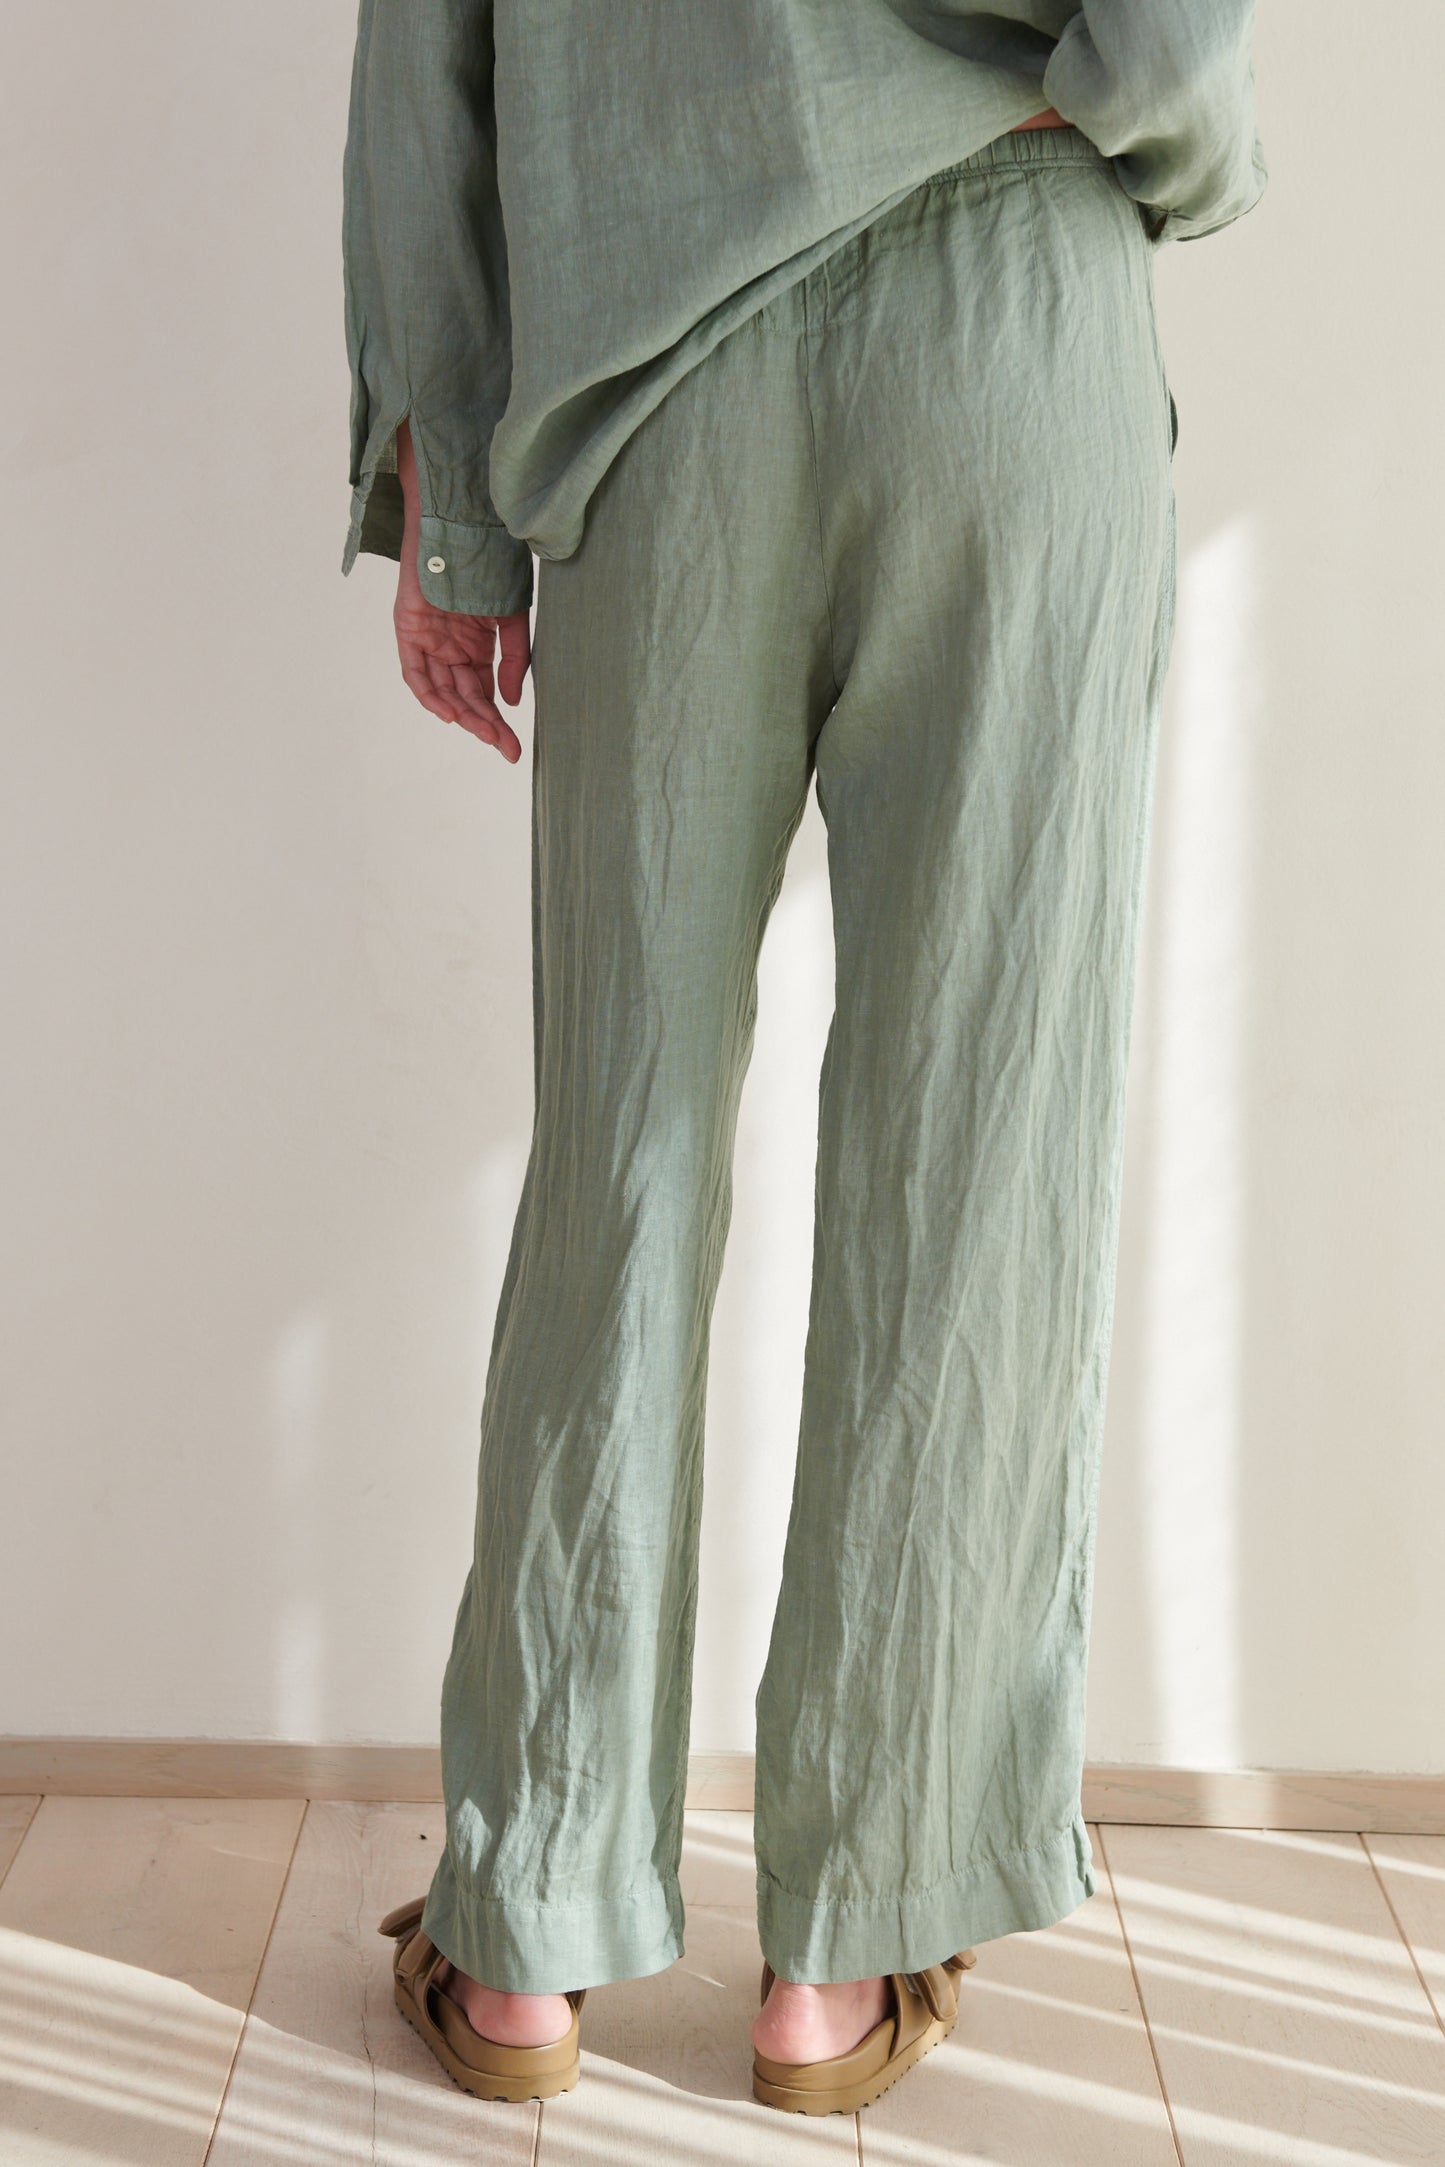 The back view of a woman wearing Velvet by Jenny Graham's PICO PANT in green linen.-26293120598209